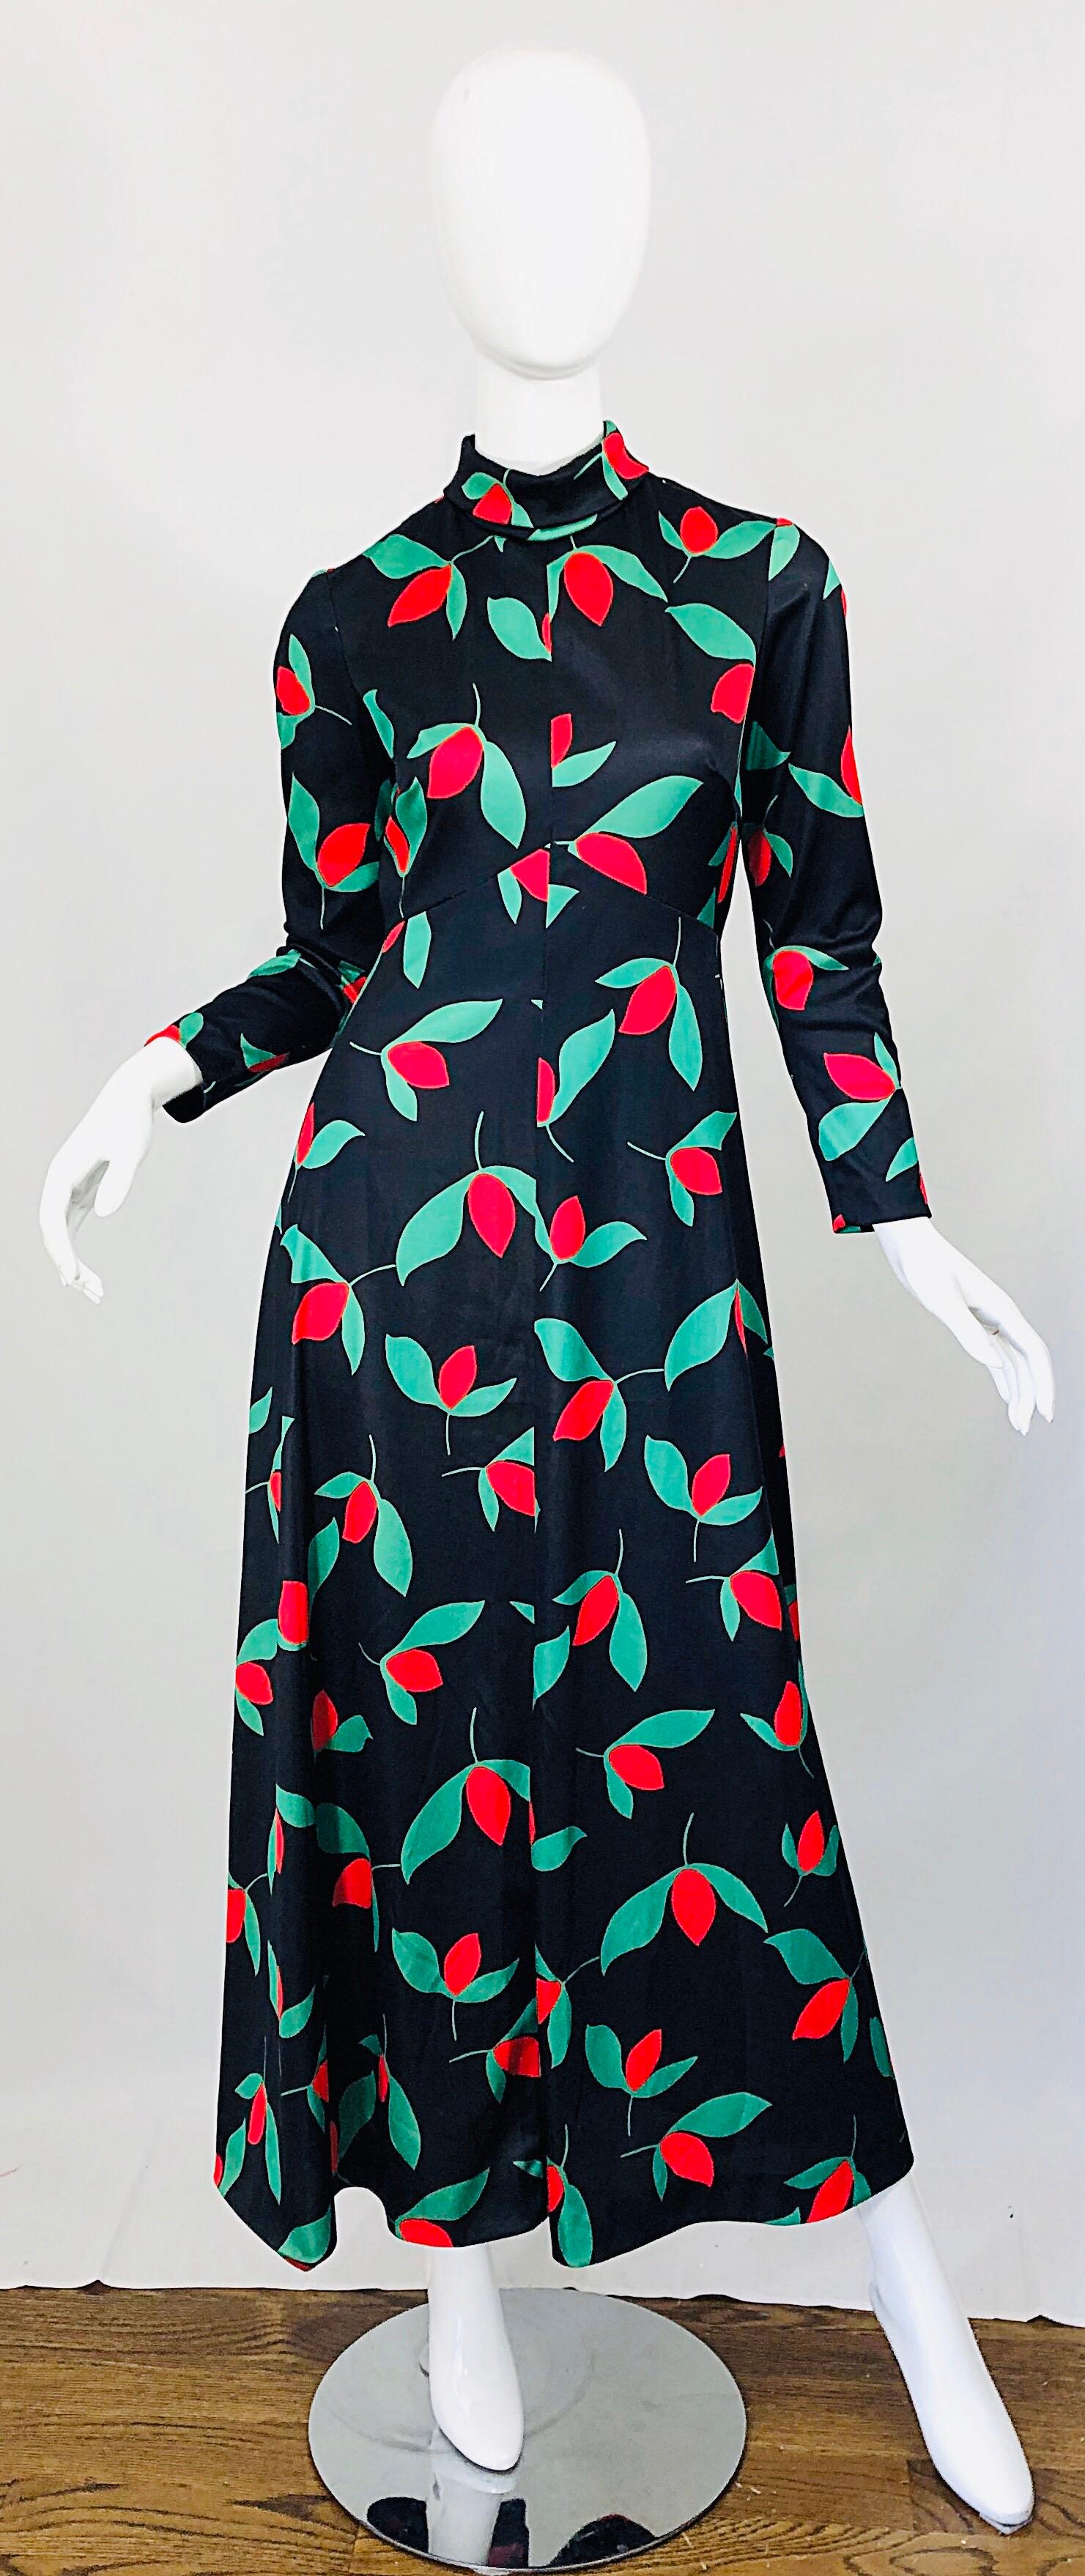 Beautiful and rare vintage 1970s EMILIO BORGHESE black, red and green tulip print long sleeve maxi dress ! Features a sleek tailored bodice with a flattering high neck. Forgiving skirt can fit an array of hip sizes. Hidden zipper up the back with